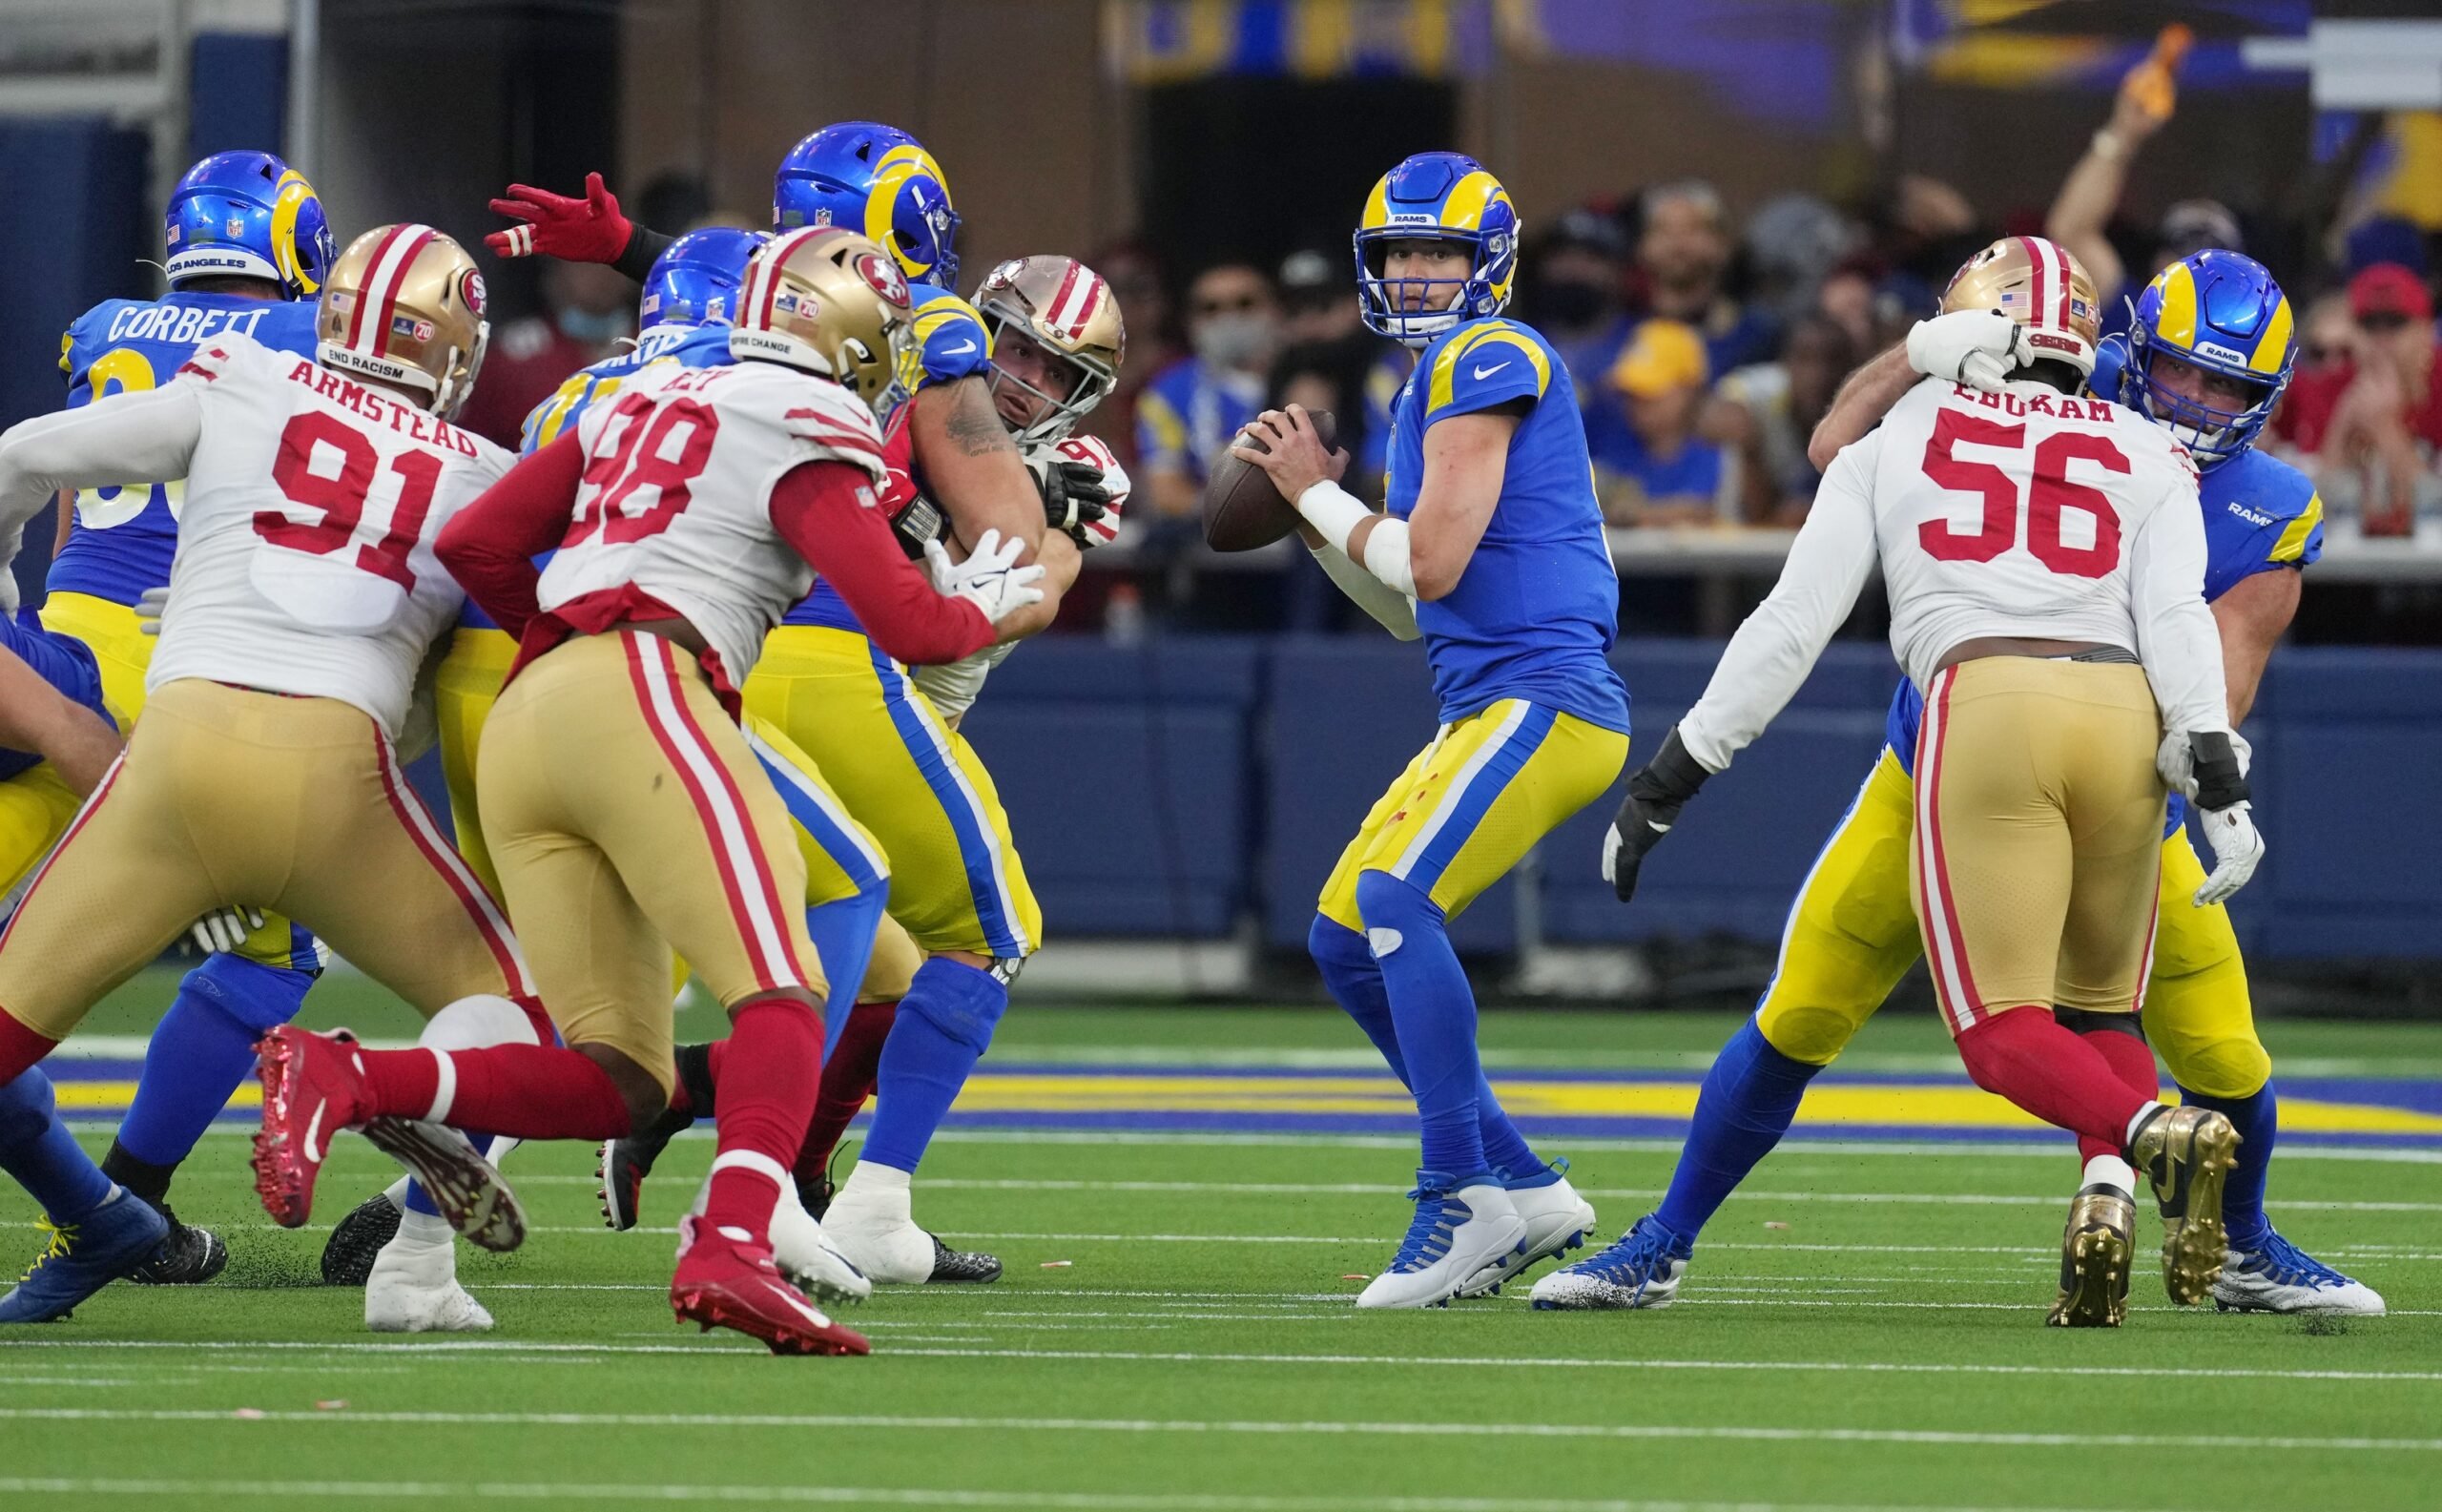 watch 49ers rams game live